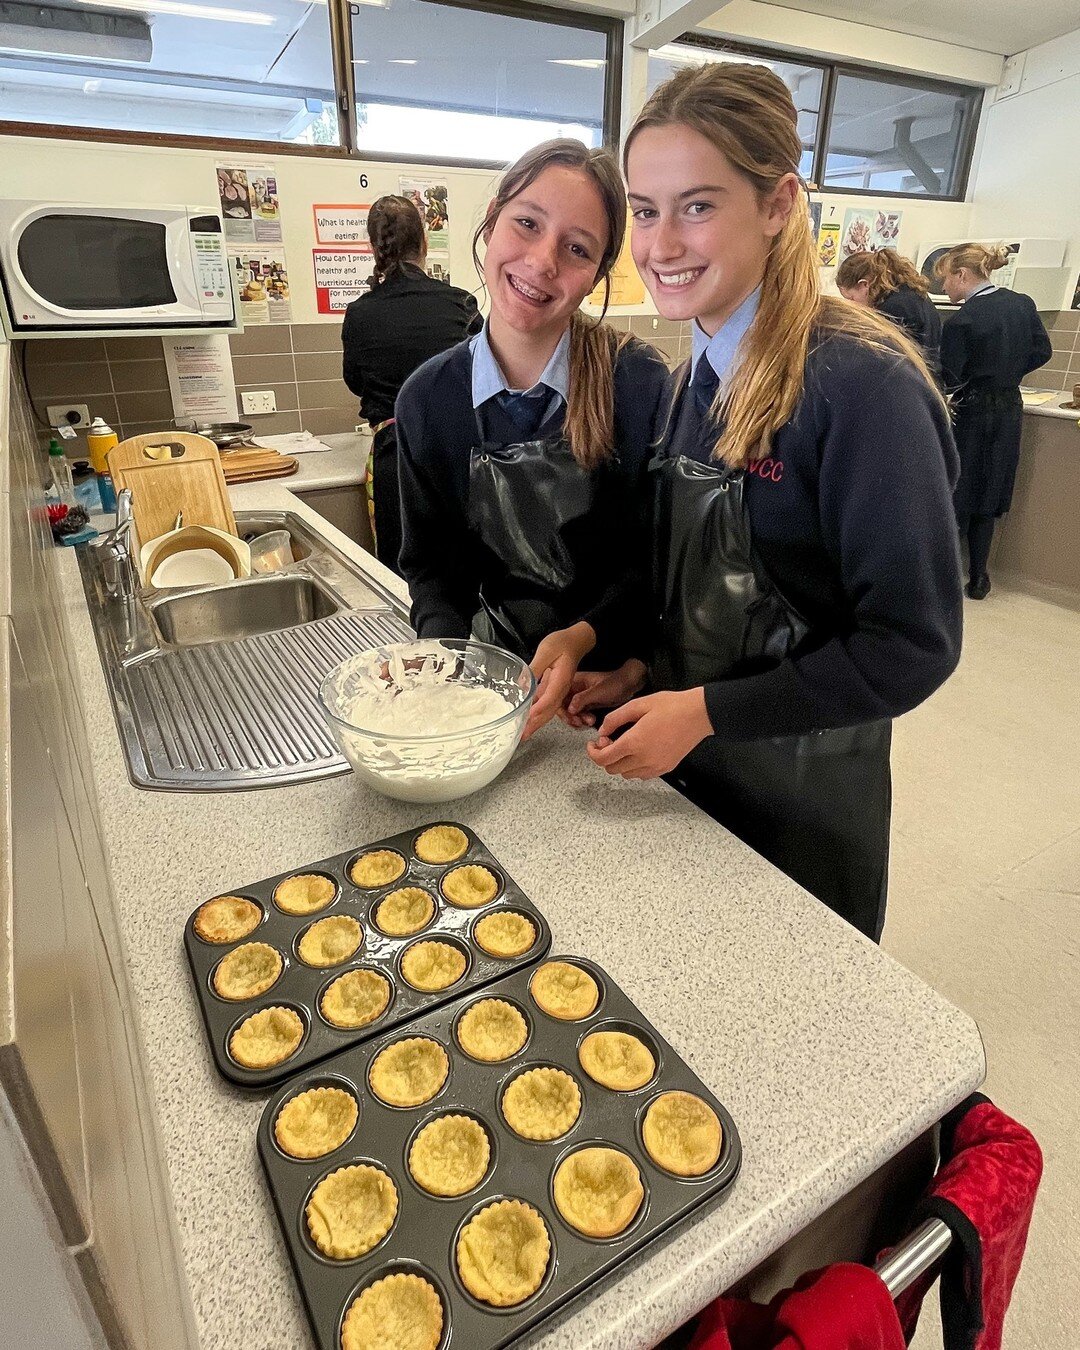 Morphett Vale students were very creative with their tasty treats in today's cooking class.

https://svcc.sa.edu.au/whats-new/wonderful-treats-by-our-cooking-students